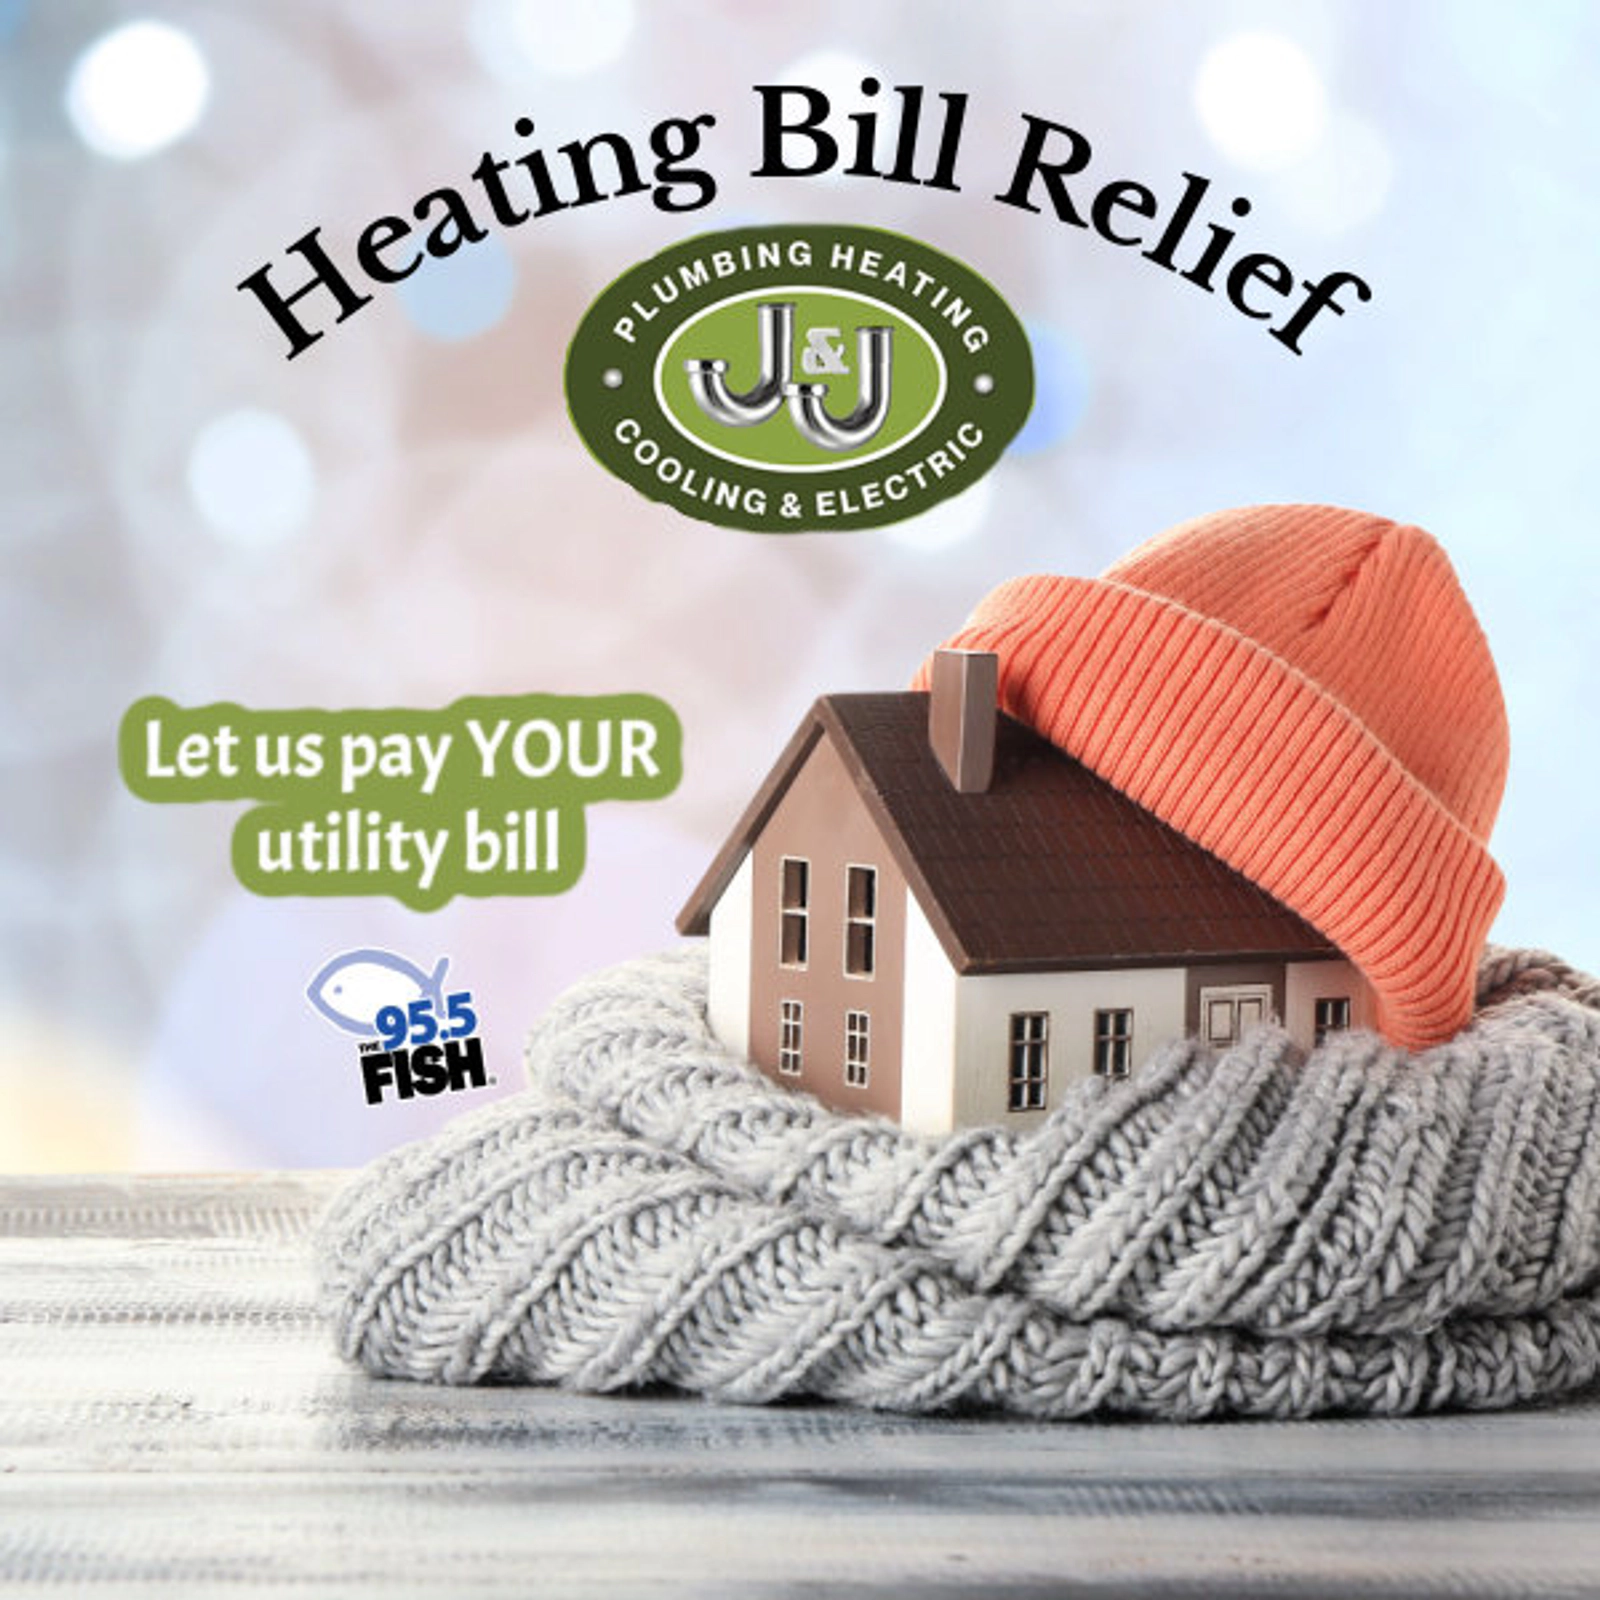 Heating Bill Relief  from J & J Plumbing, Heating, Cooling & Electric